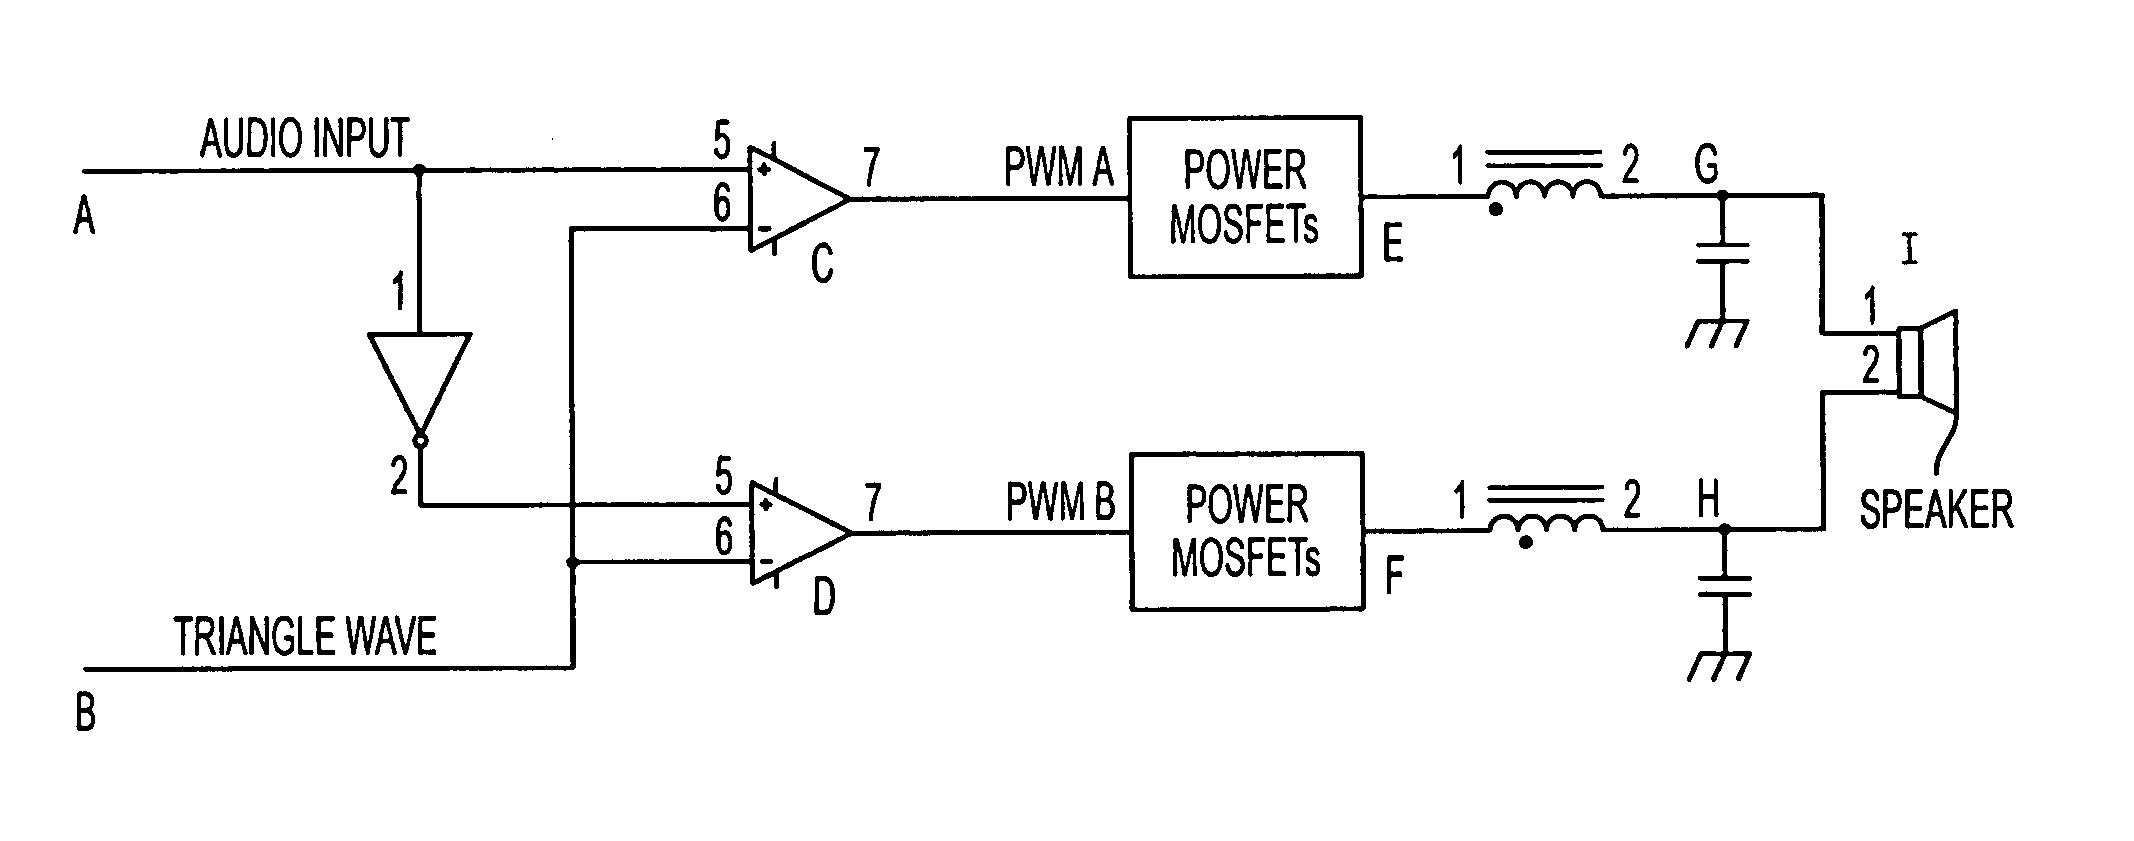 Power supply rejection for pulse width modulated amplifiers and automatic gain control